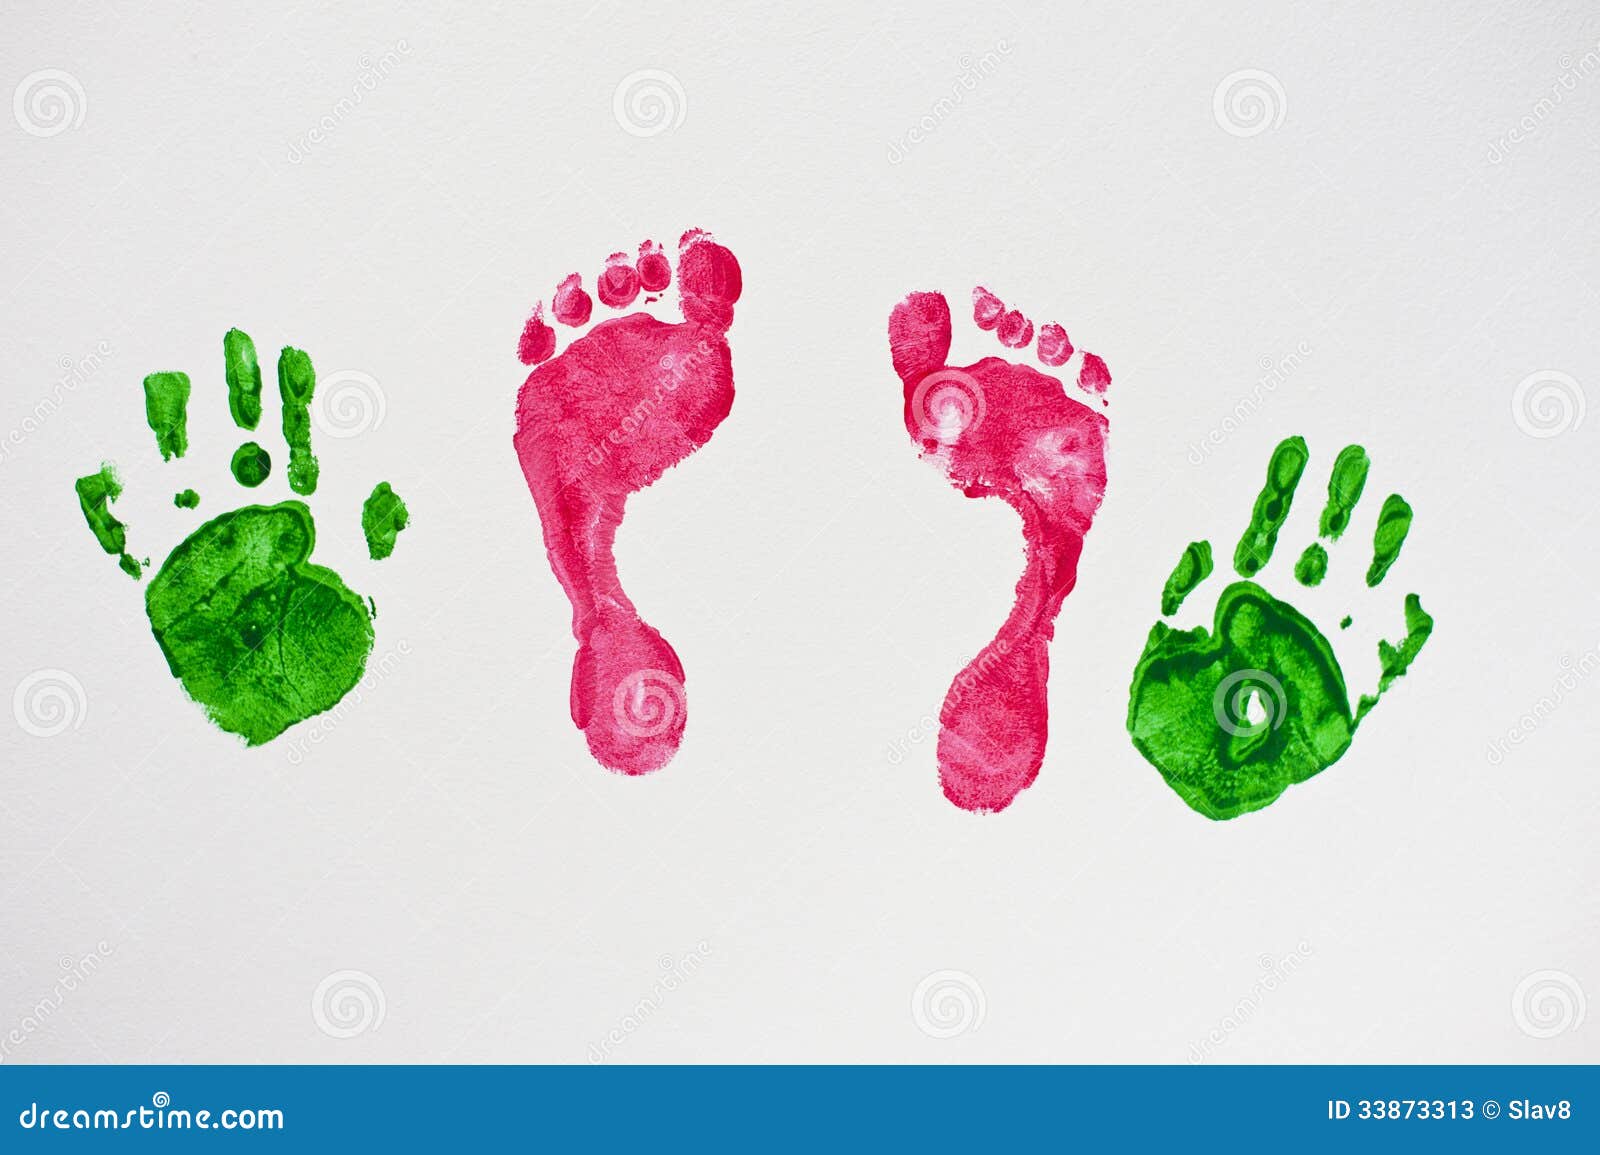 baby hands and feet clipart - photo #23